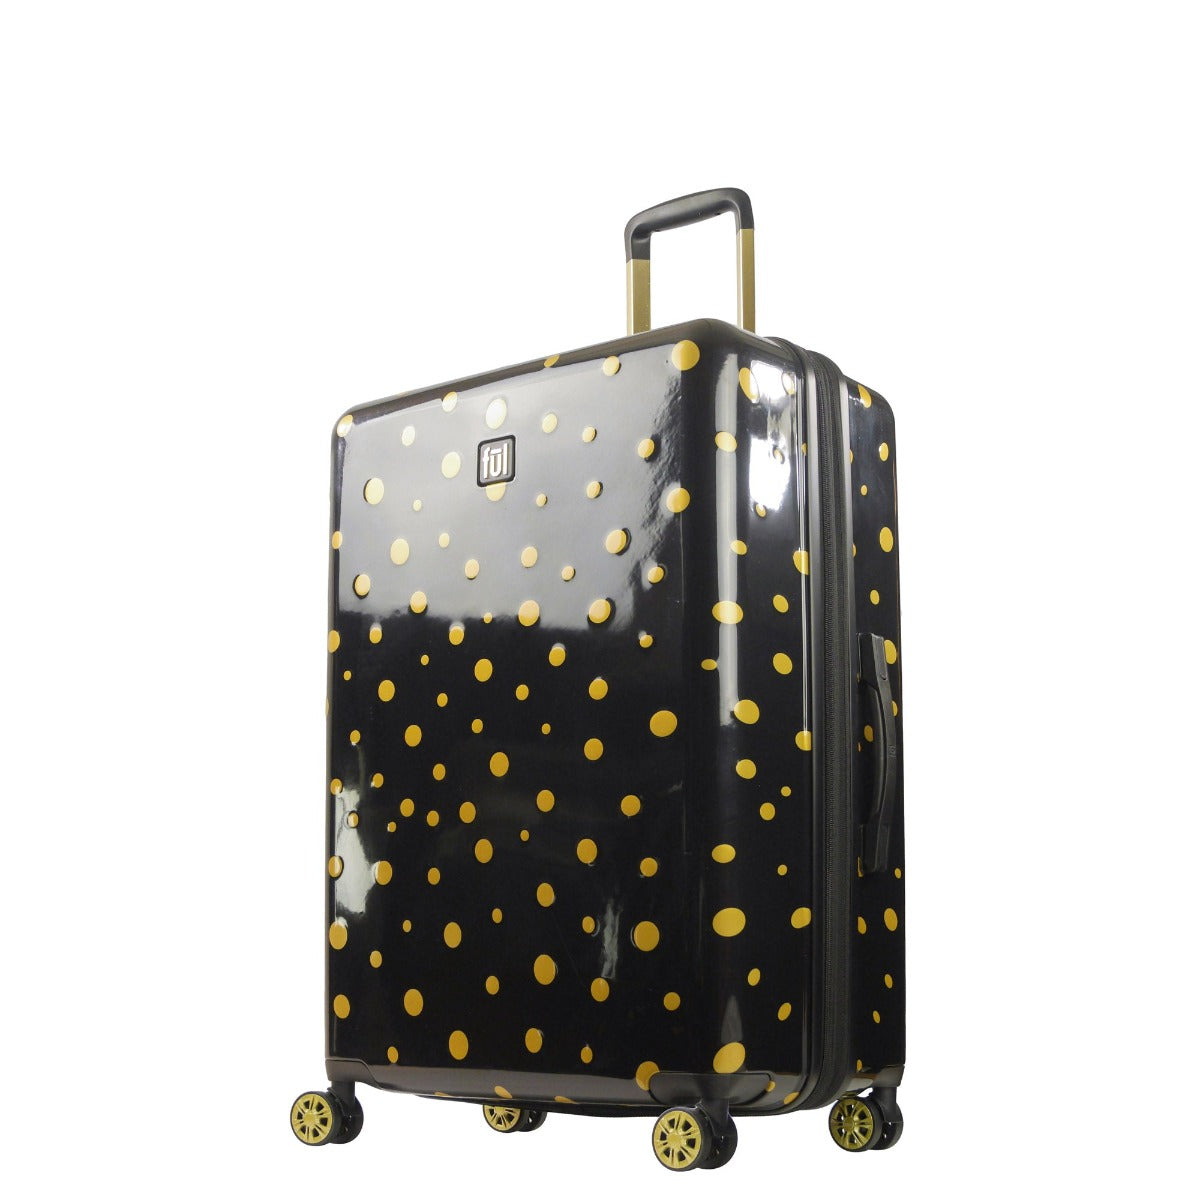 Ful Impulse Mixed Dots Hardside Spinner 31" Checked Luggage Black Gold Suitcase